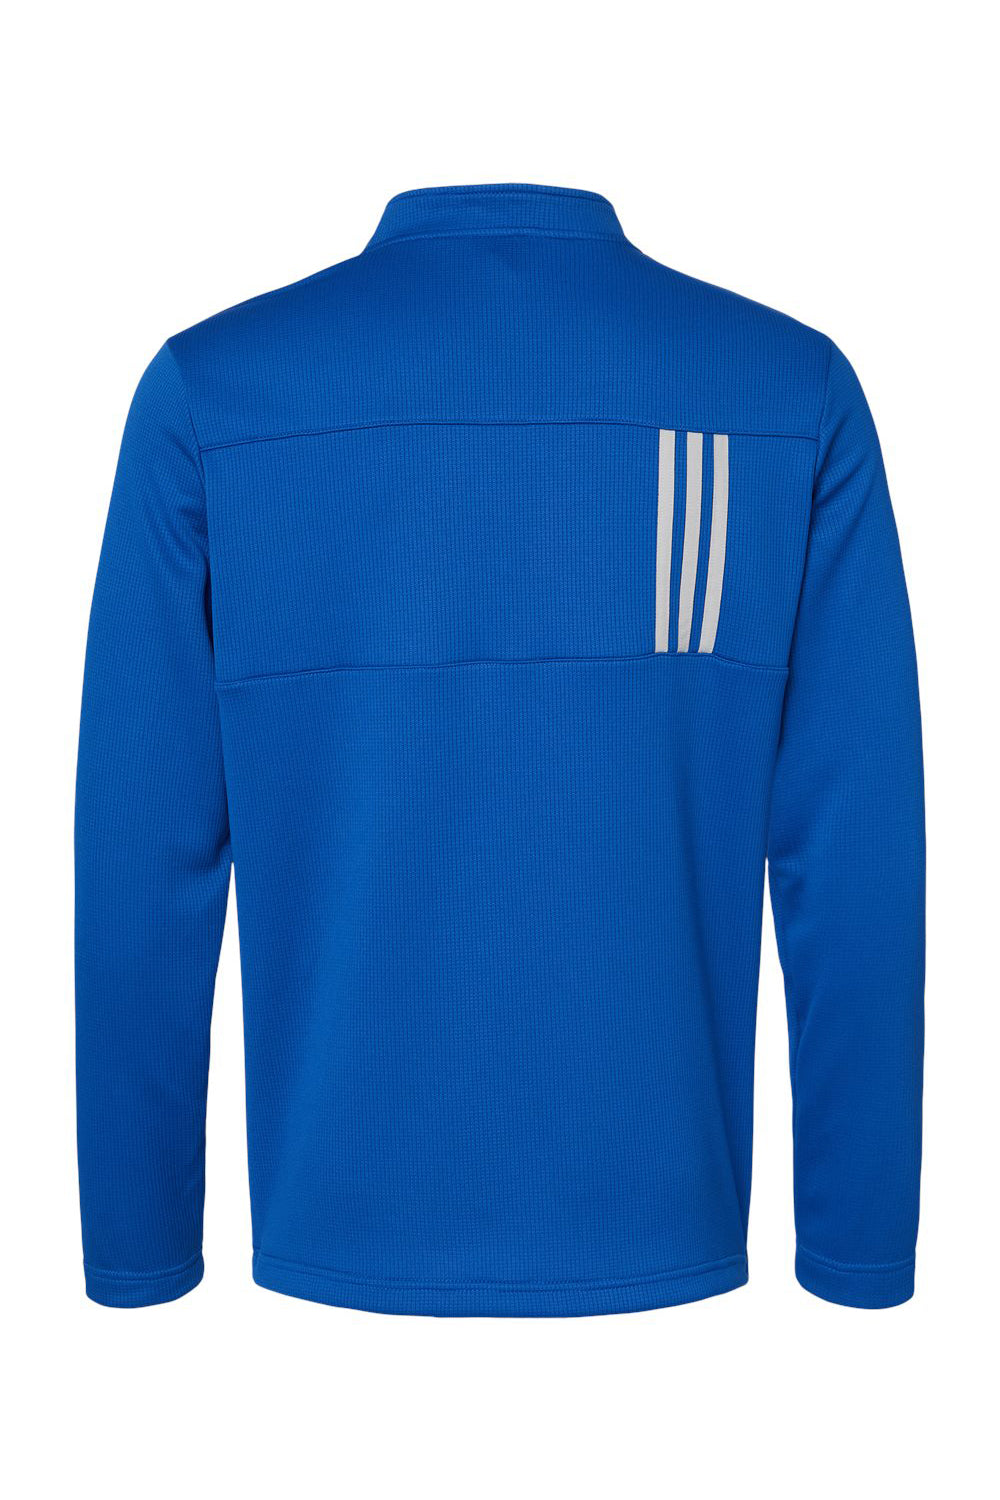 Adidas A482 Mens 3 Stripes Double Knit 1/4 Zip Pullover Team Royal Blue/Grey Flat Back